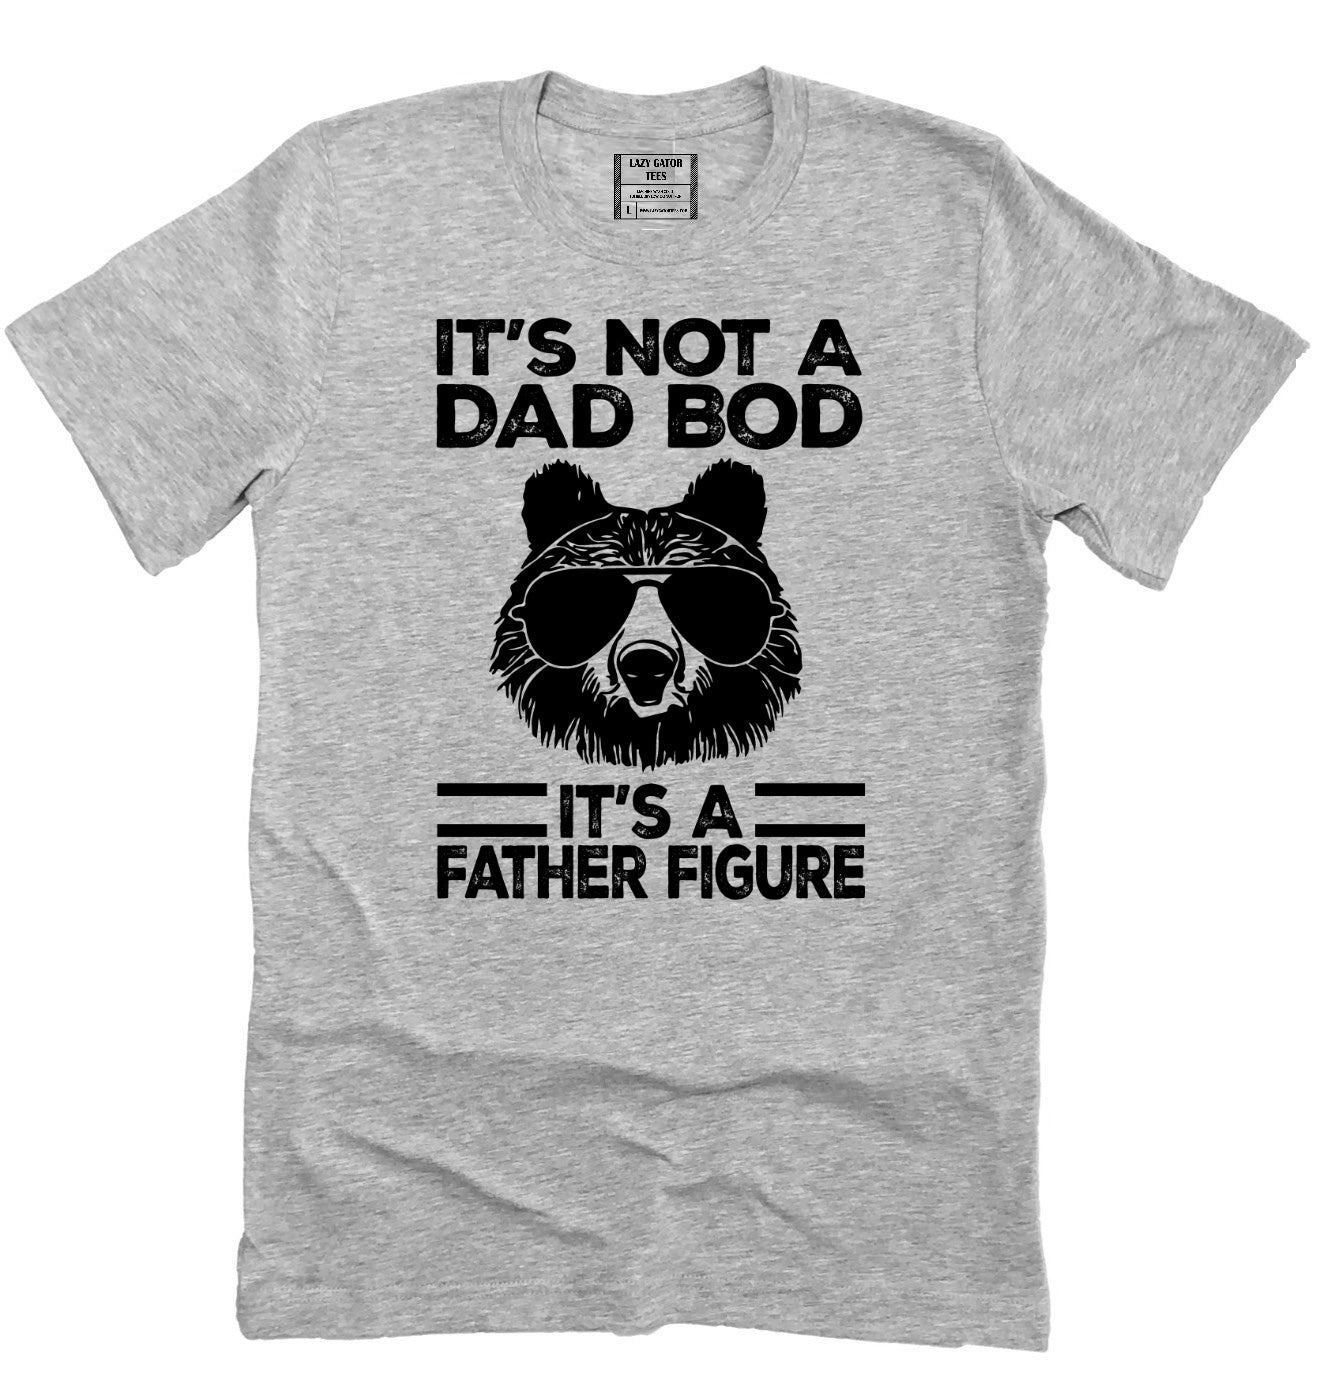 Not A Dad Bod It's A Father Figure Funny Dad Pun Father's Shirt Novelty T-shirt Tee